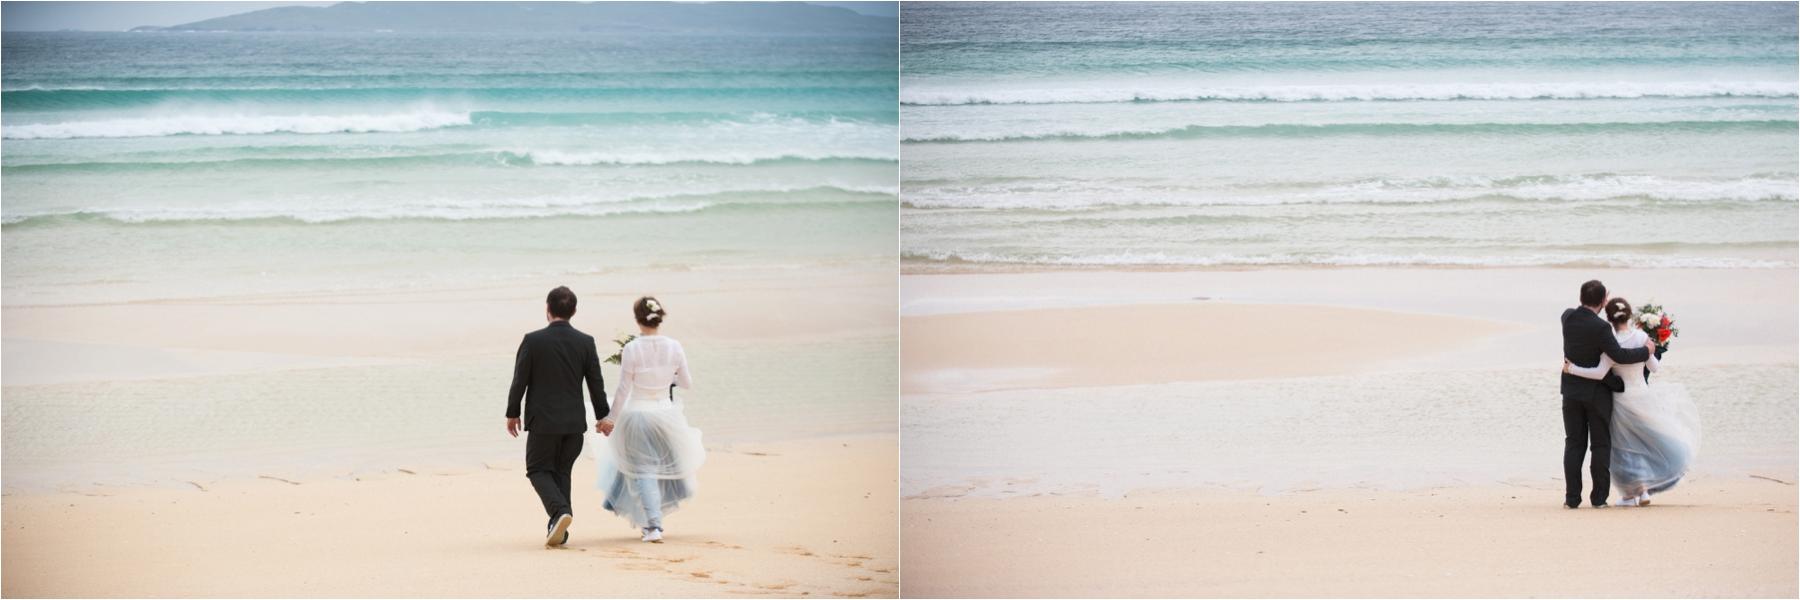 Scottish islands elopement wedding photography with a bride and groom on a deserted beach, waves crashing behind them. 